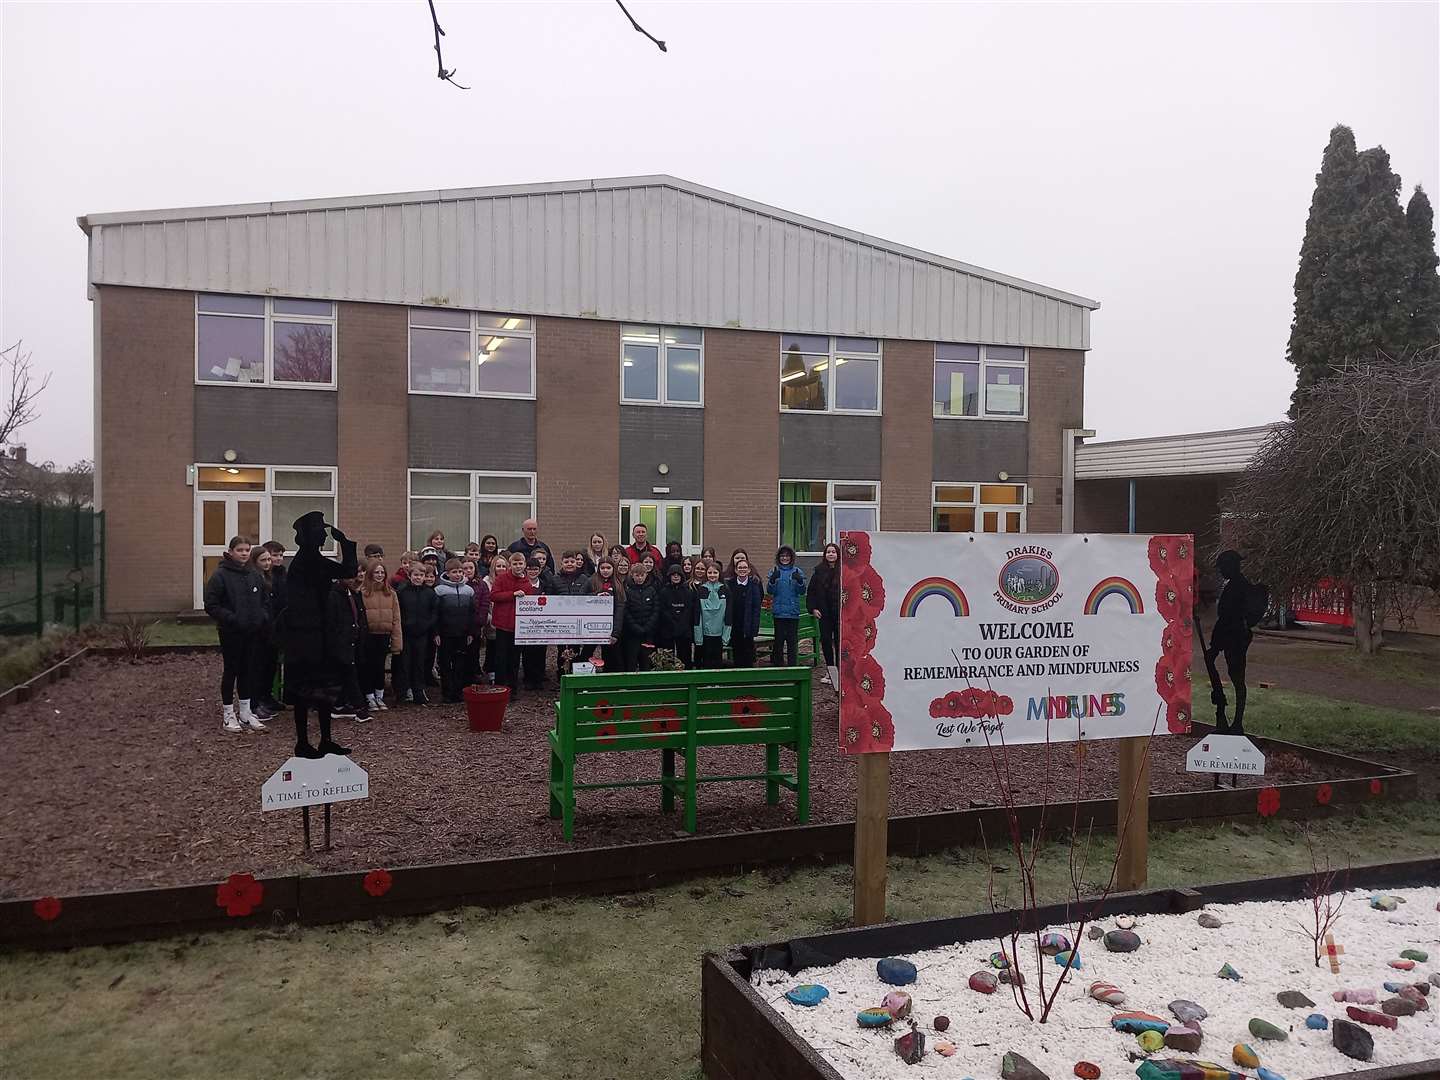 Drakies Primary School organised and participated in a weeklong fundraising extravaganza to raise funds for the Scottish Poppy Appeal.